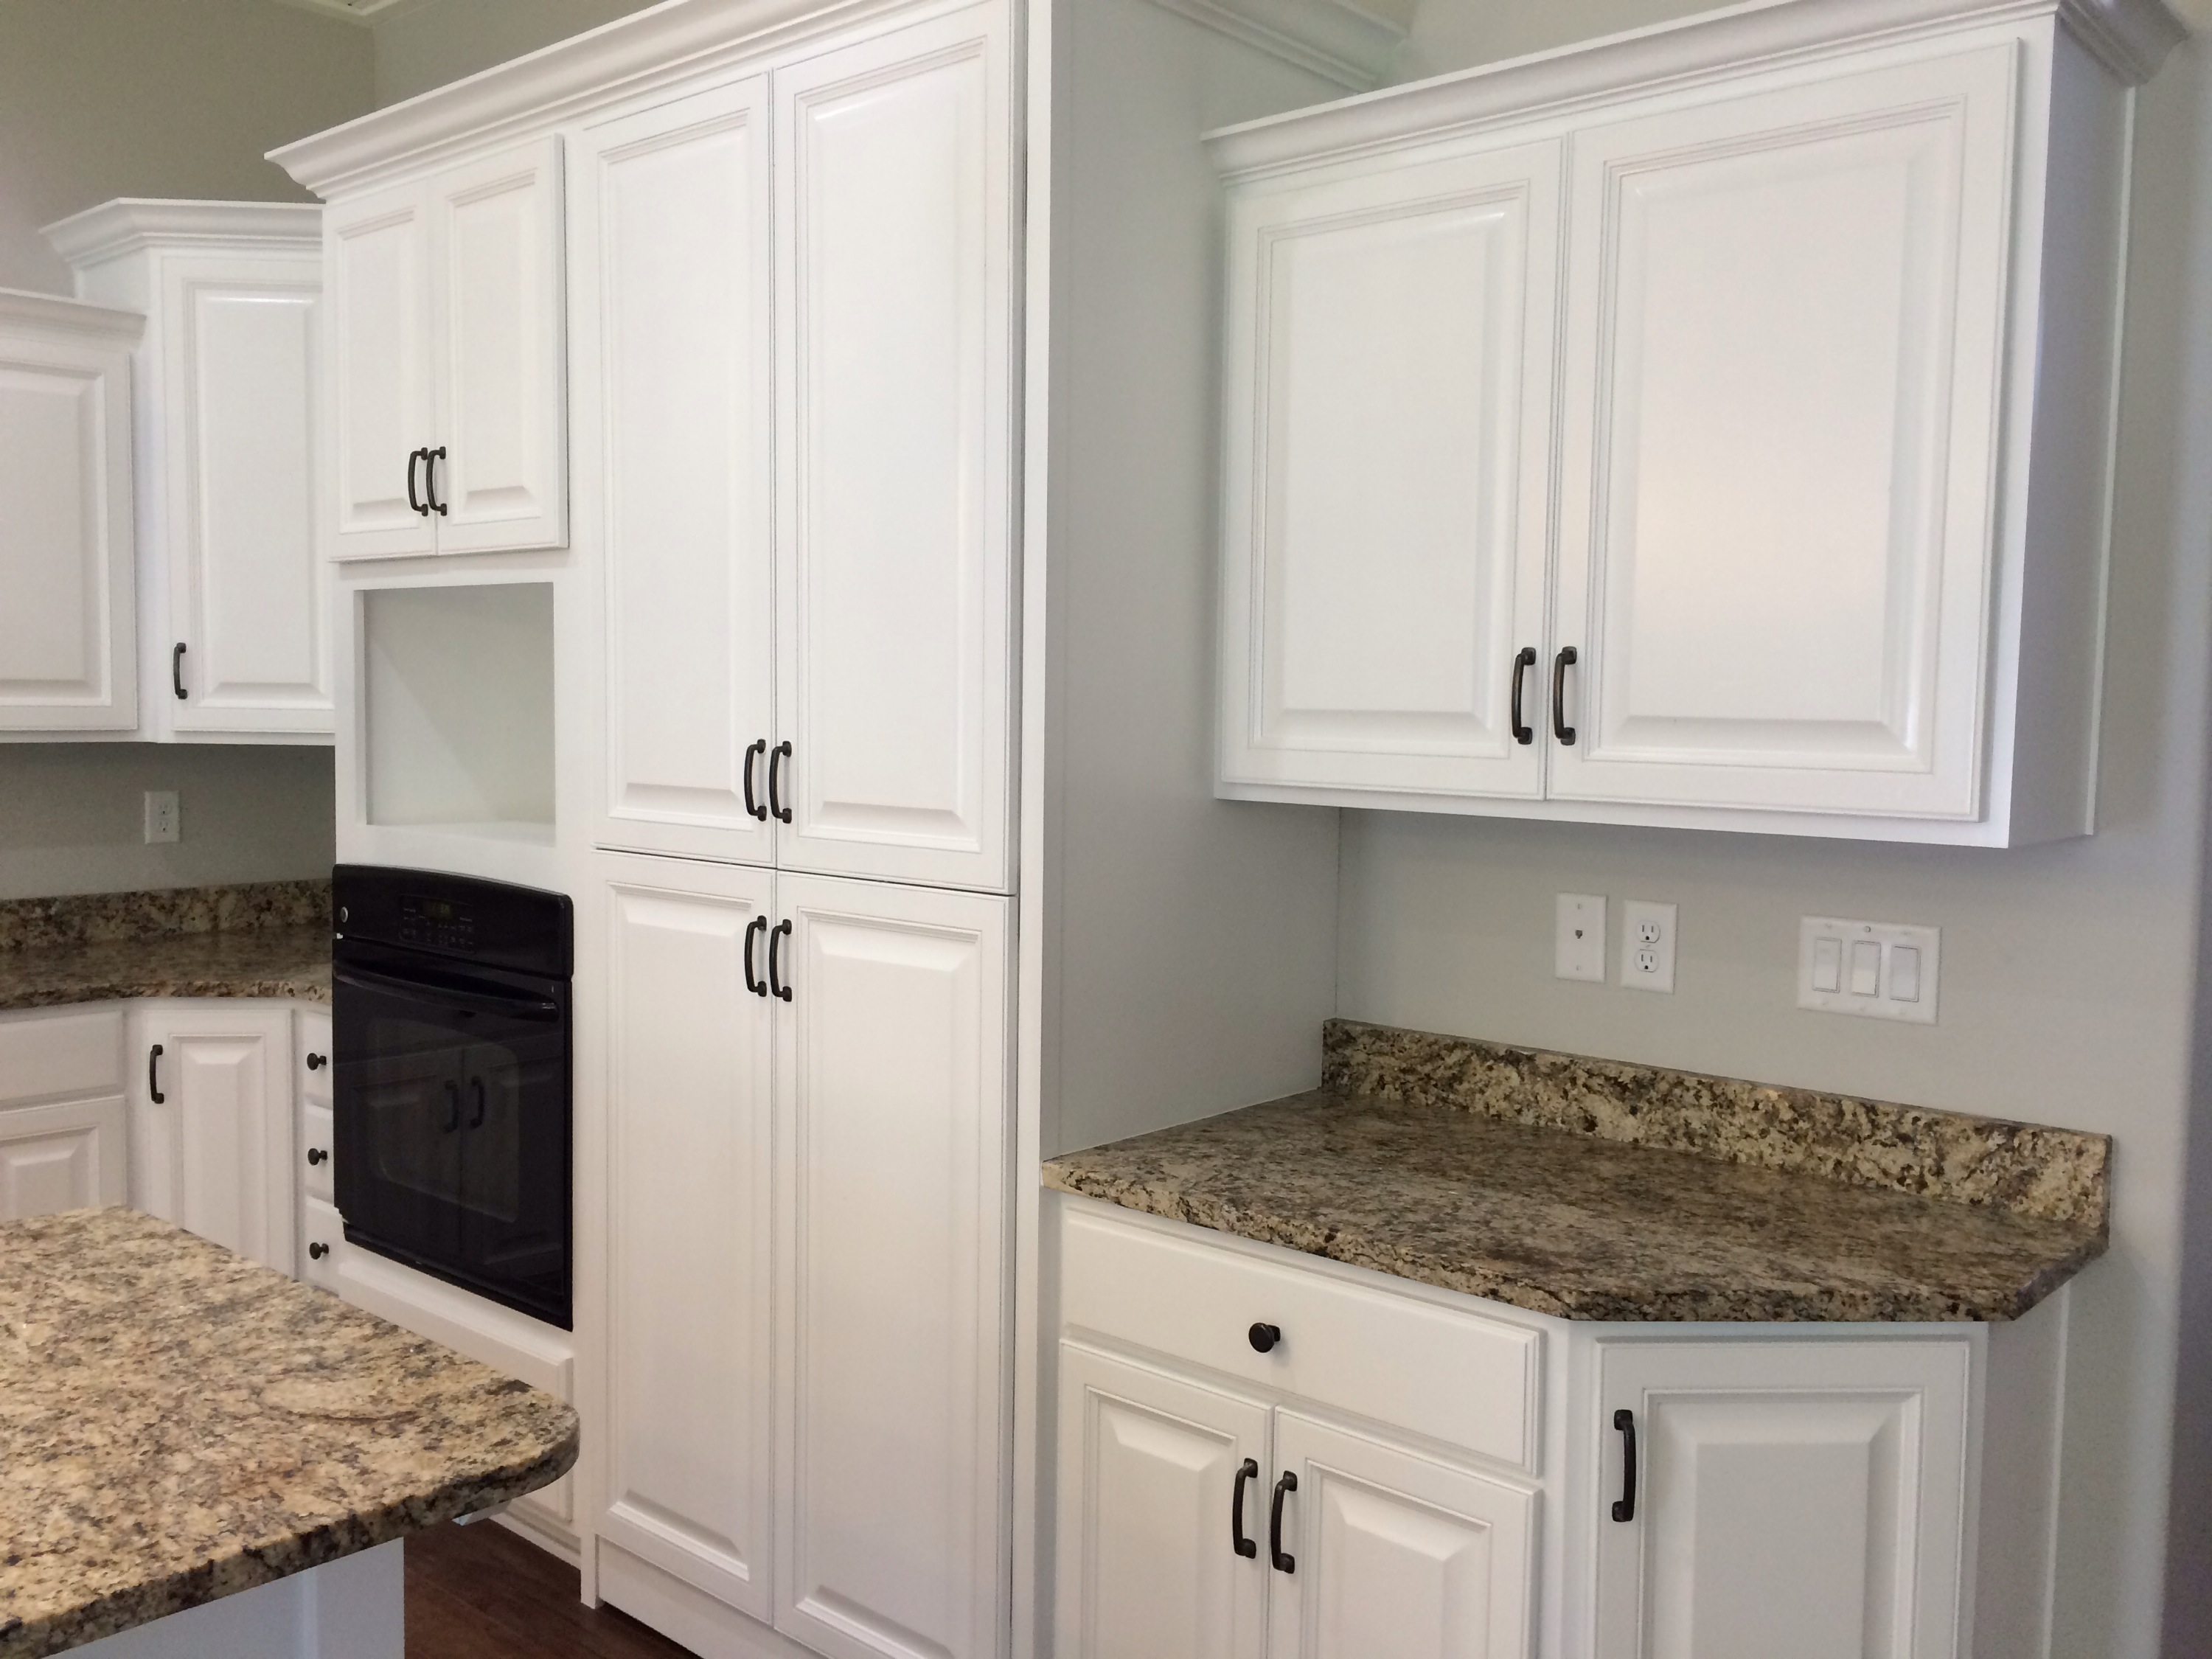 Knotty Alder Kitchen Cabinets And Granite Countertops After Being